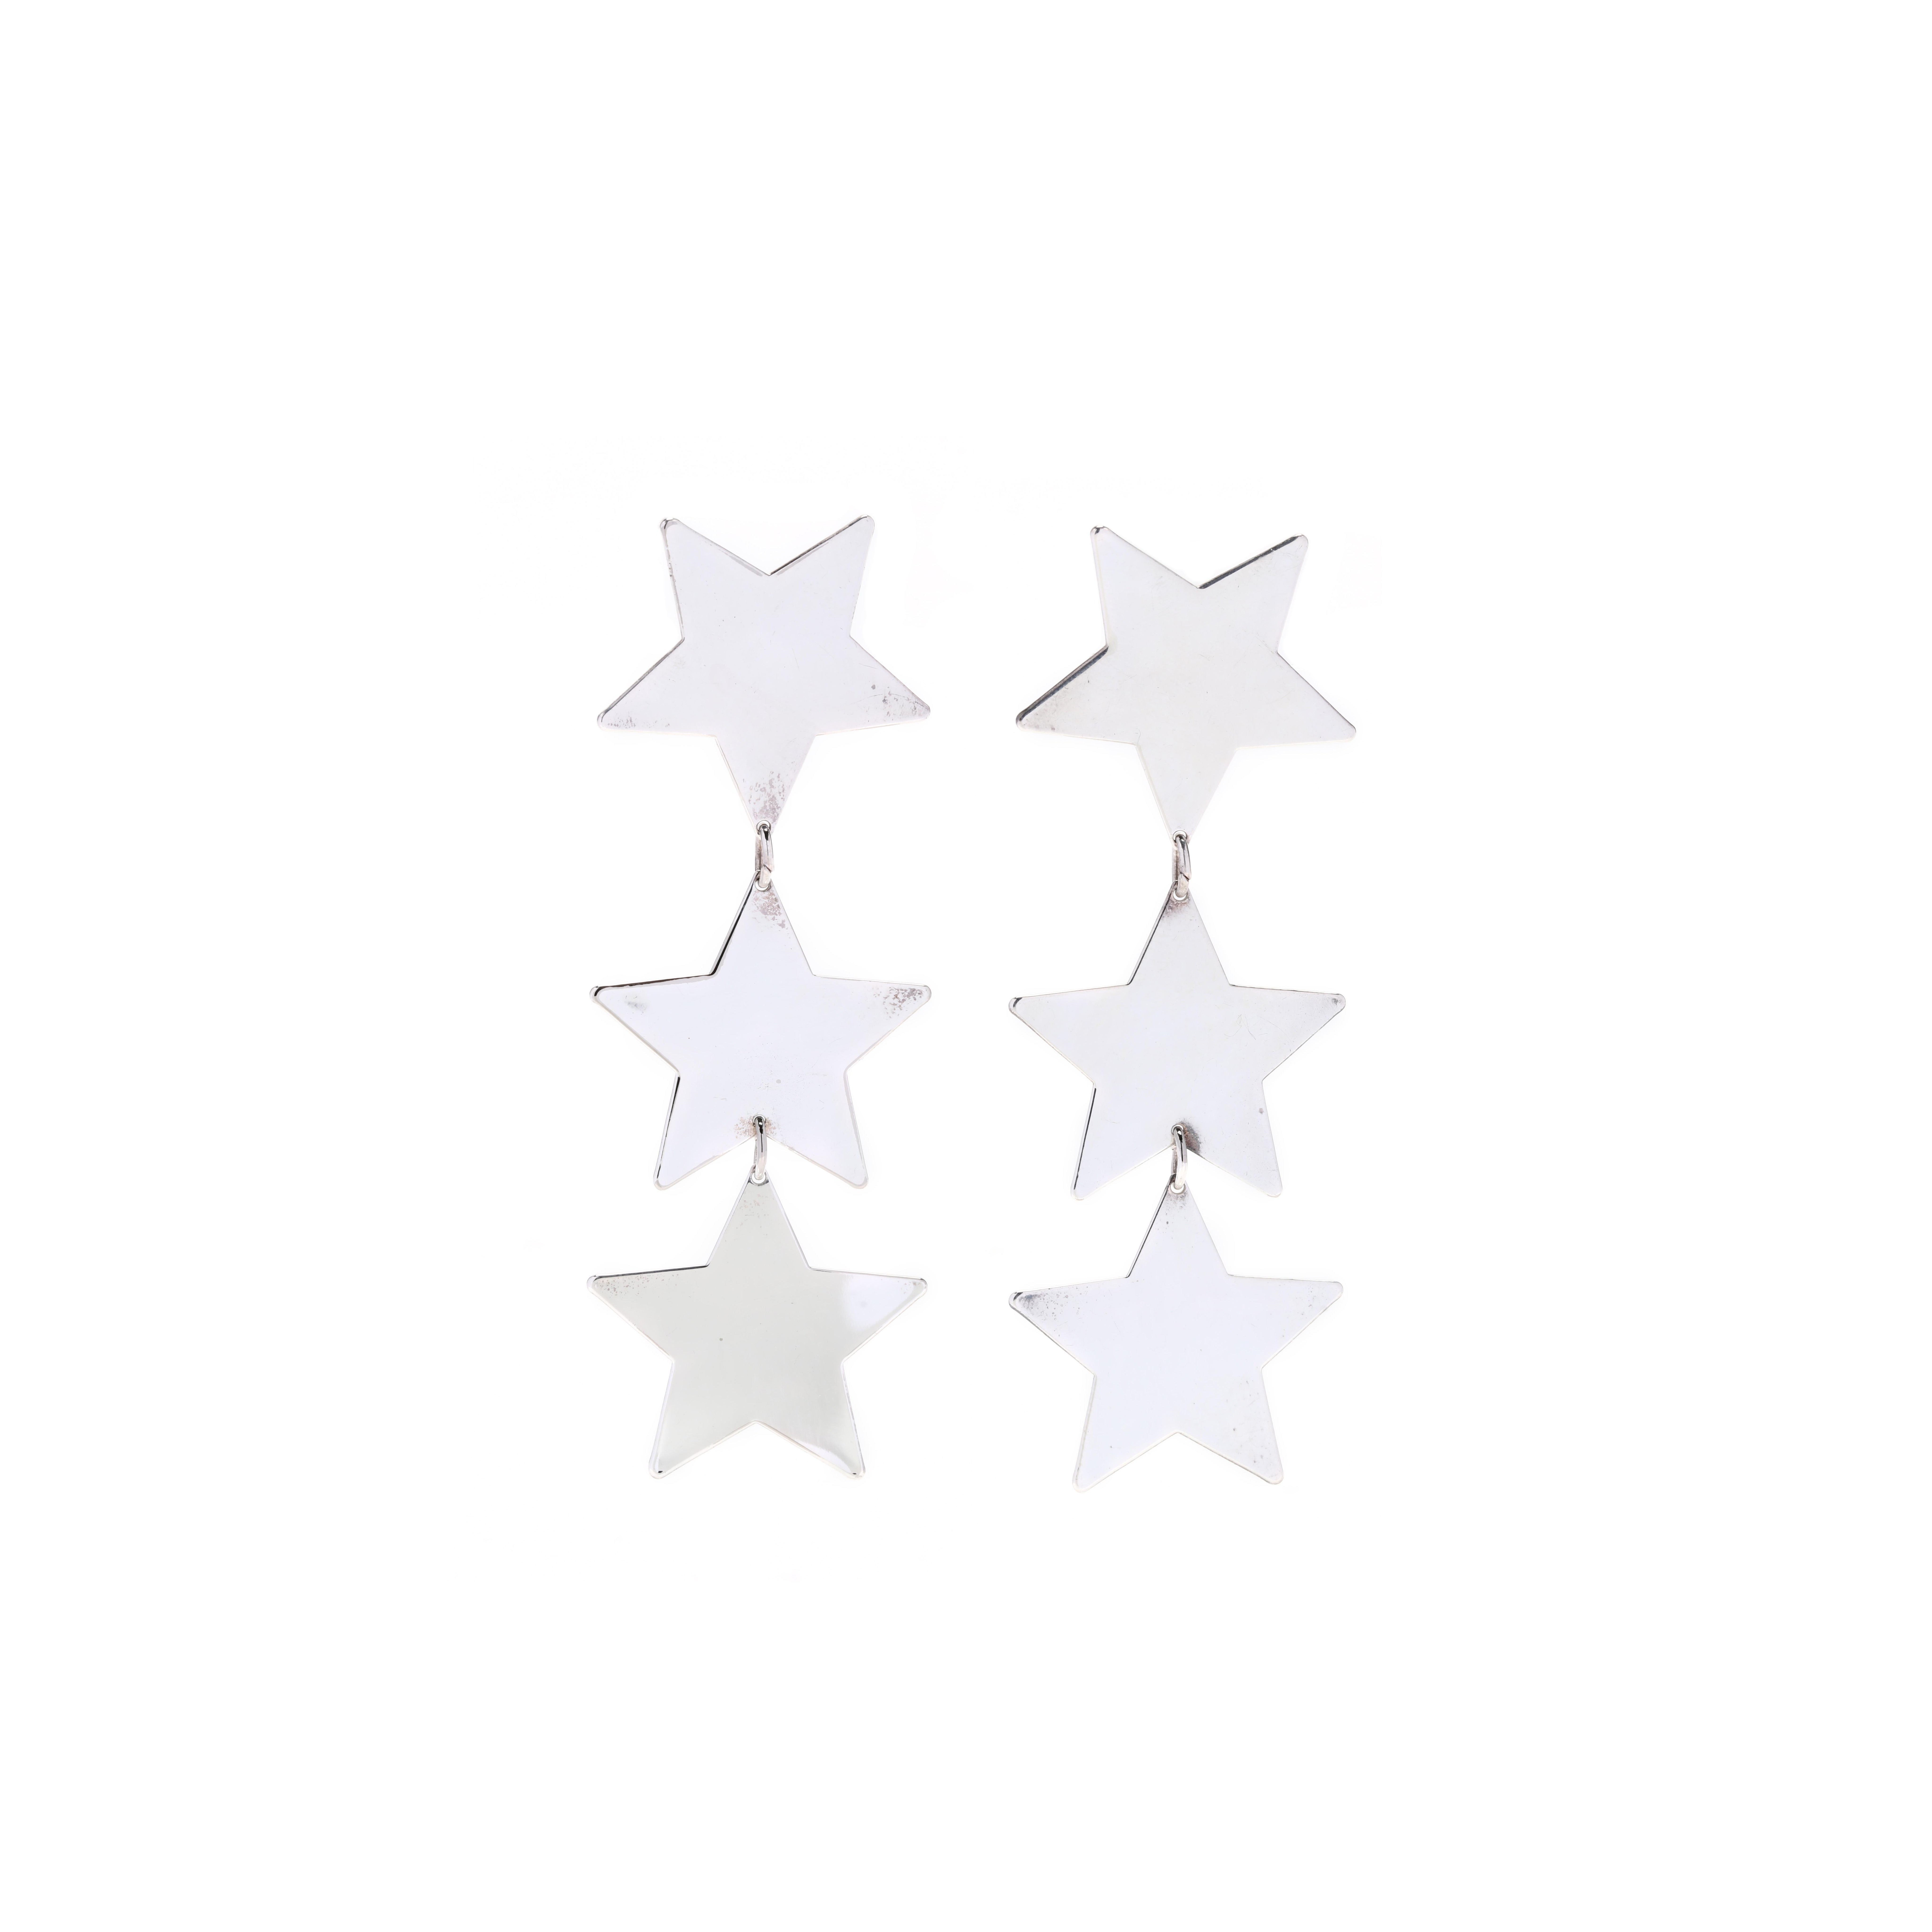 Long Star Earrings, Sterling Silver, Silver Star Earrings In Good Condition For Sale In McLeansville, NC